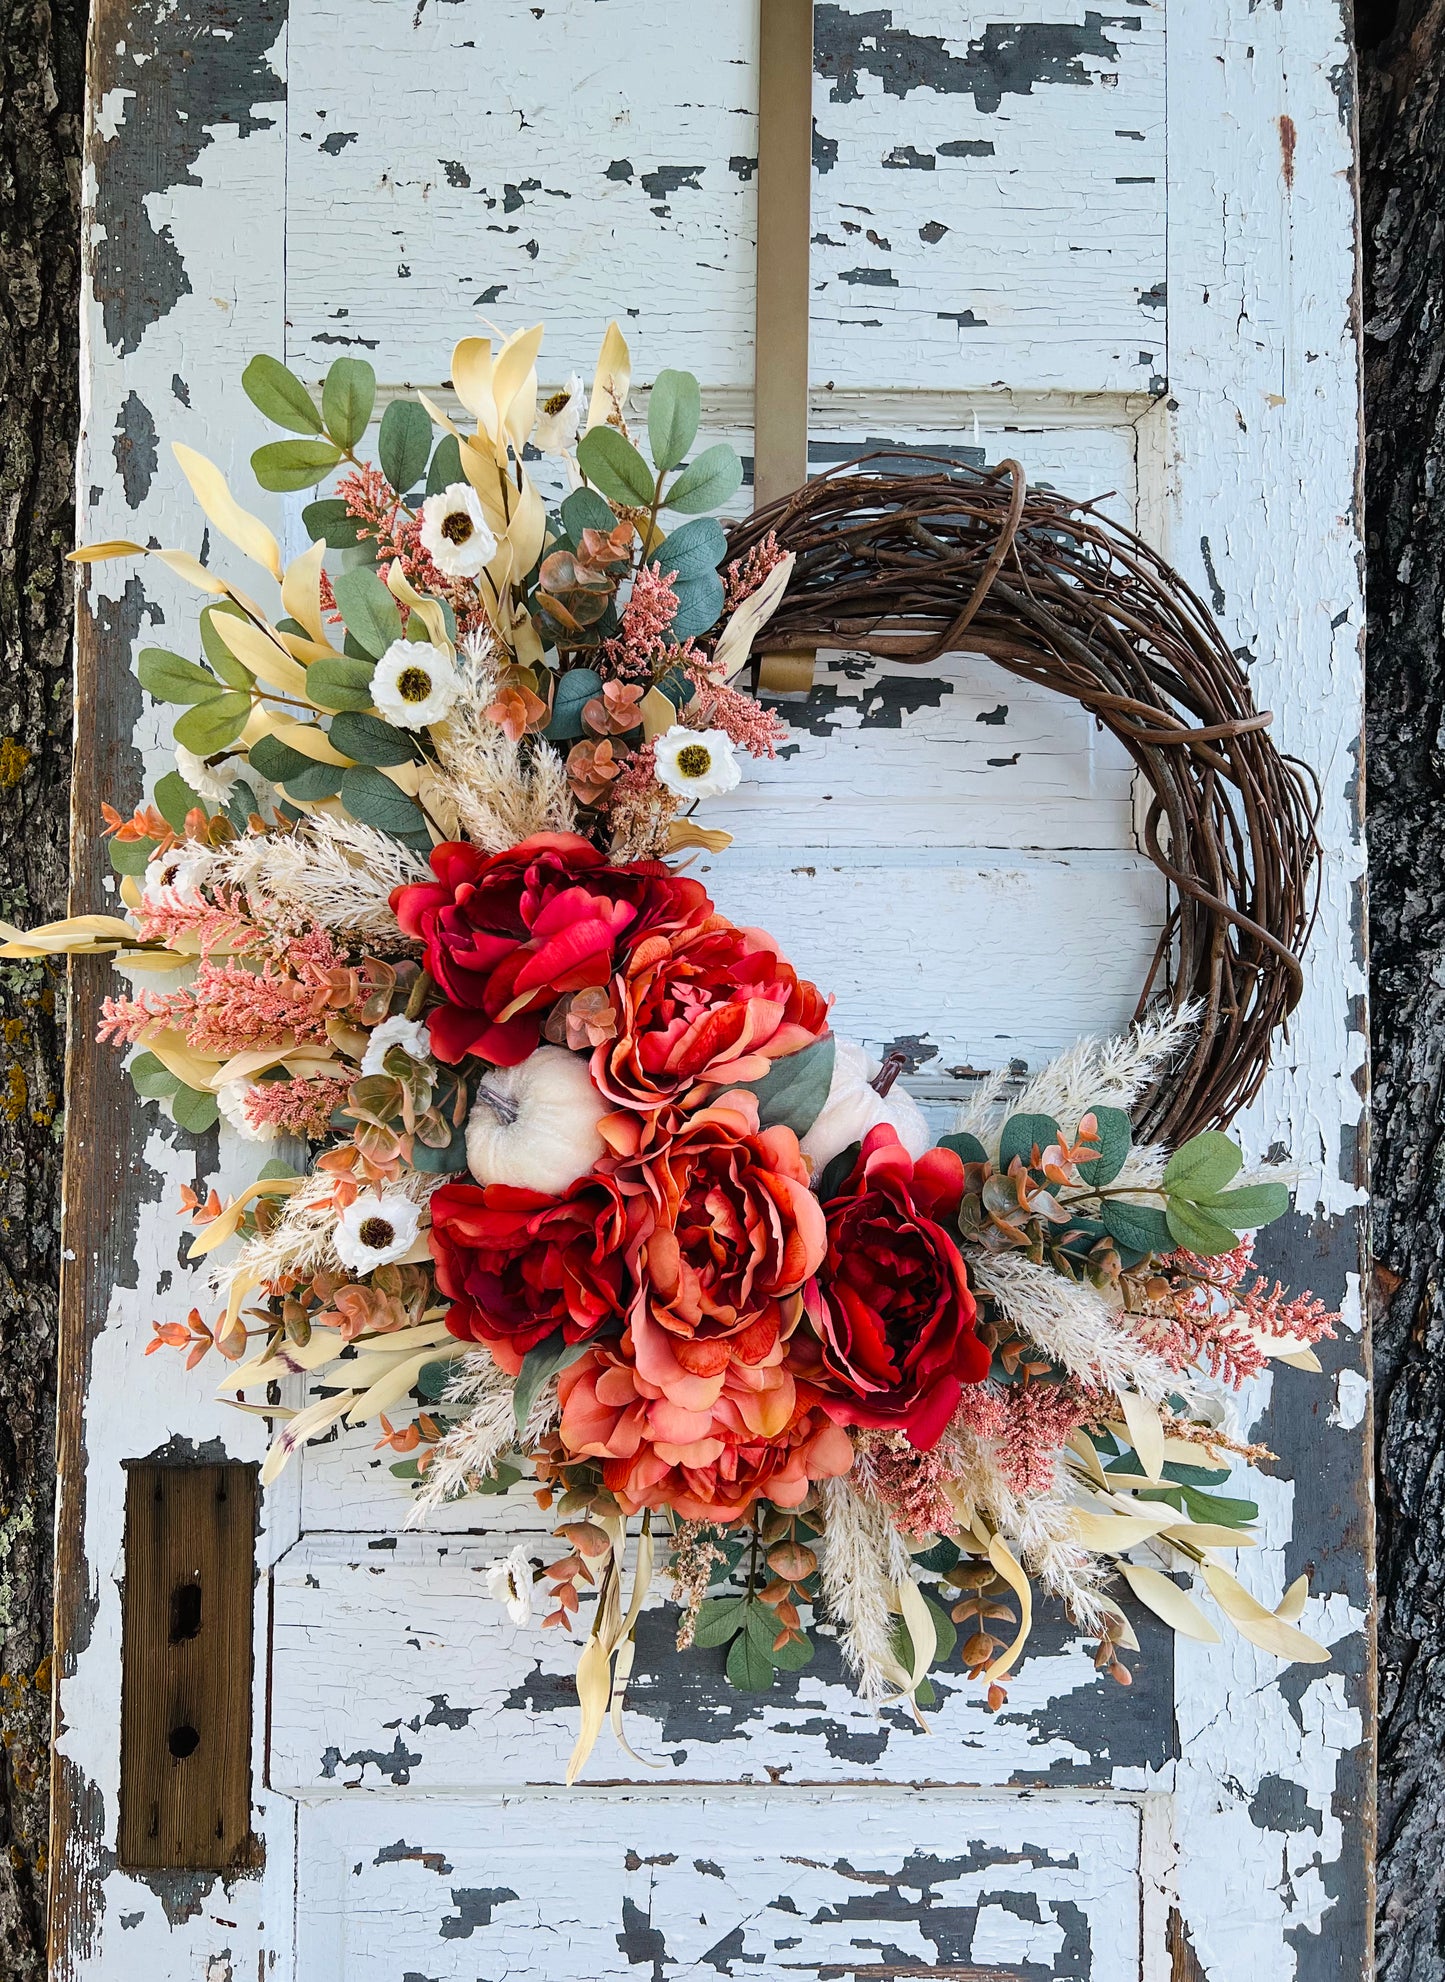 How to Make a Heart Wreath with a Wire Hanger and Foraged